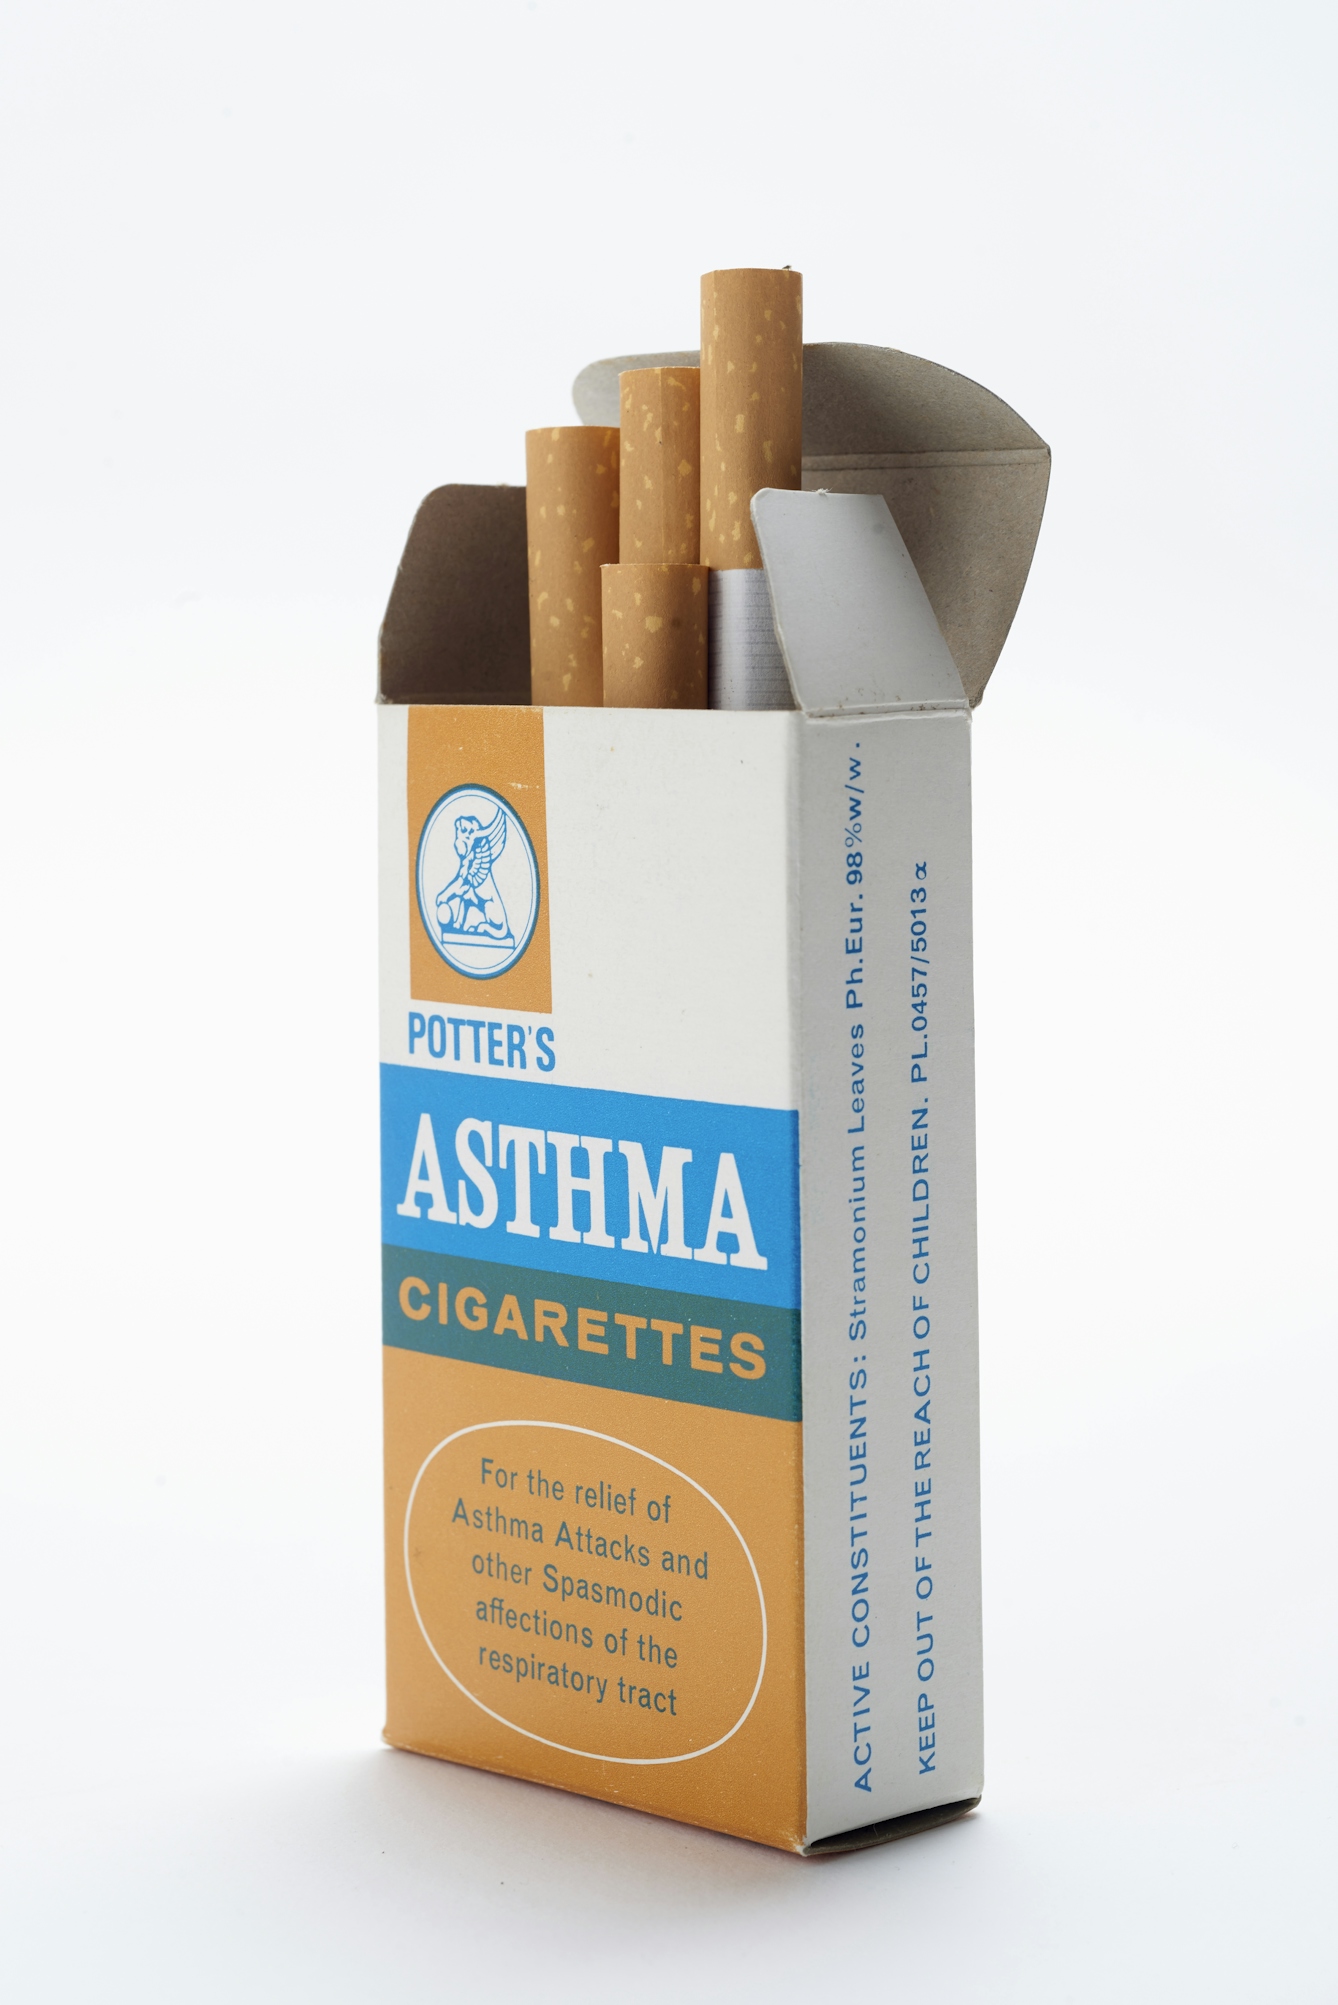 Colour photograph of packet of cigarettes labelled as being "for the relief of asthma attacks and other spasmodic affections of the respiratory tract".